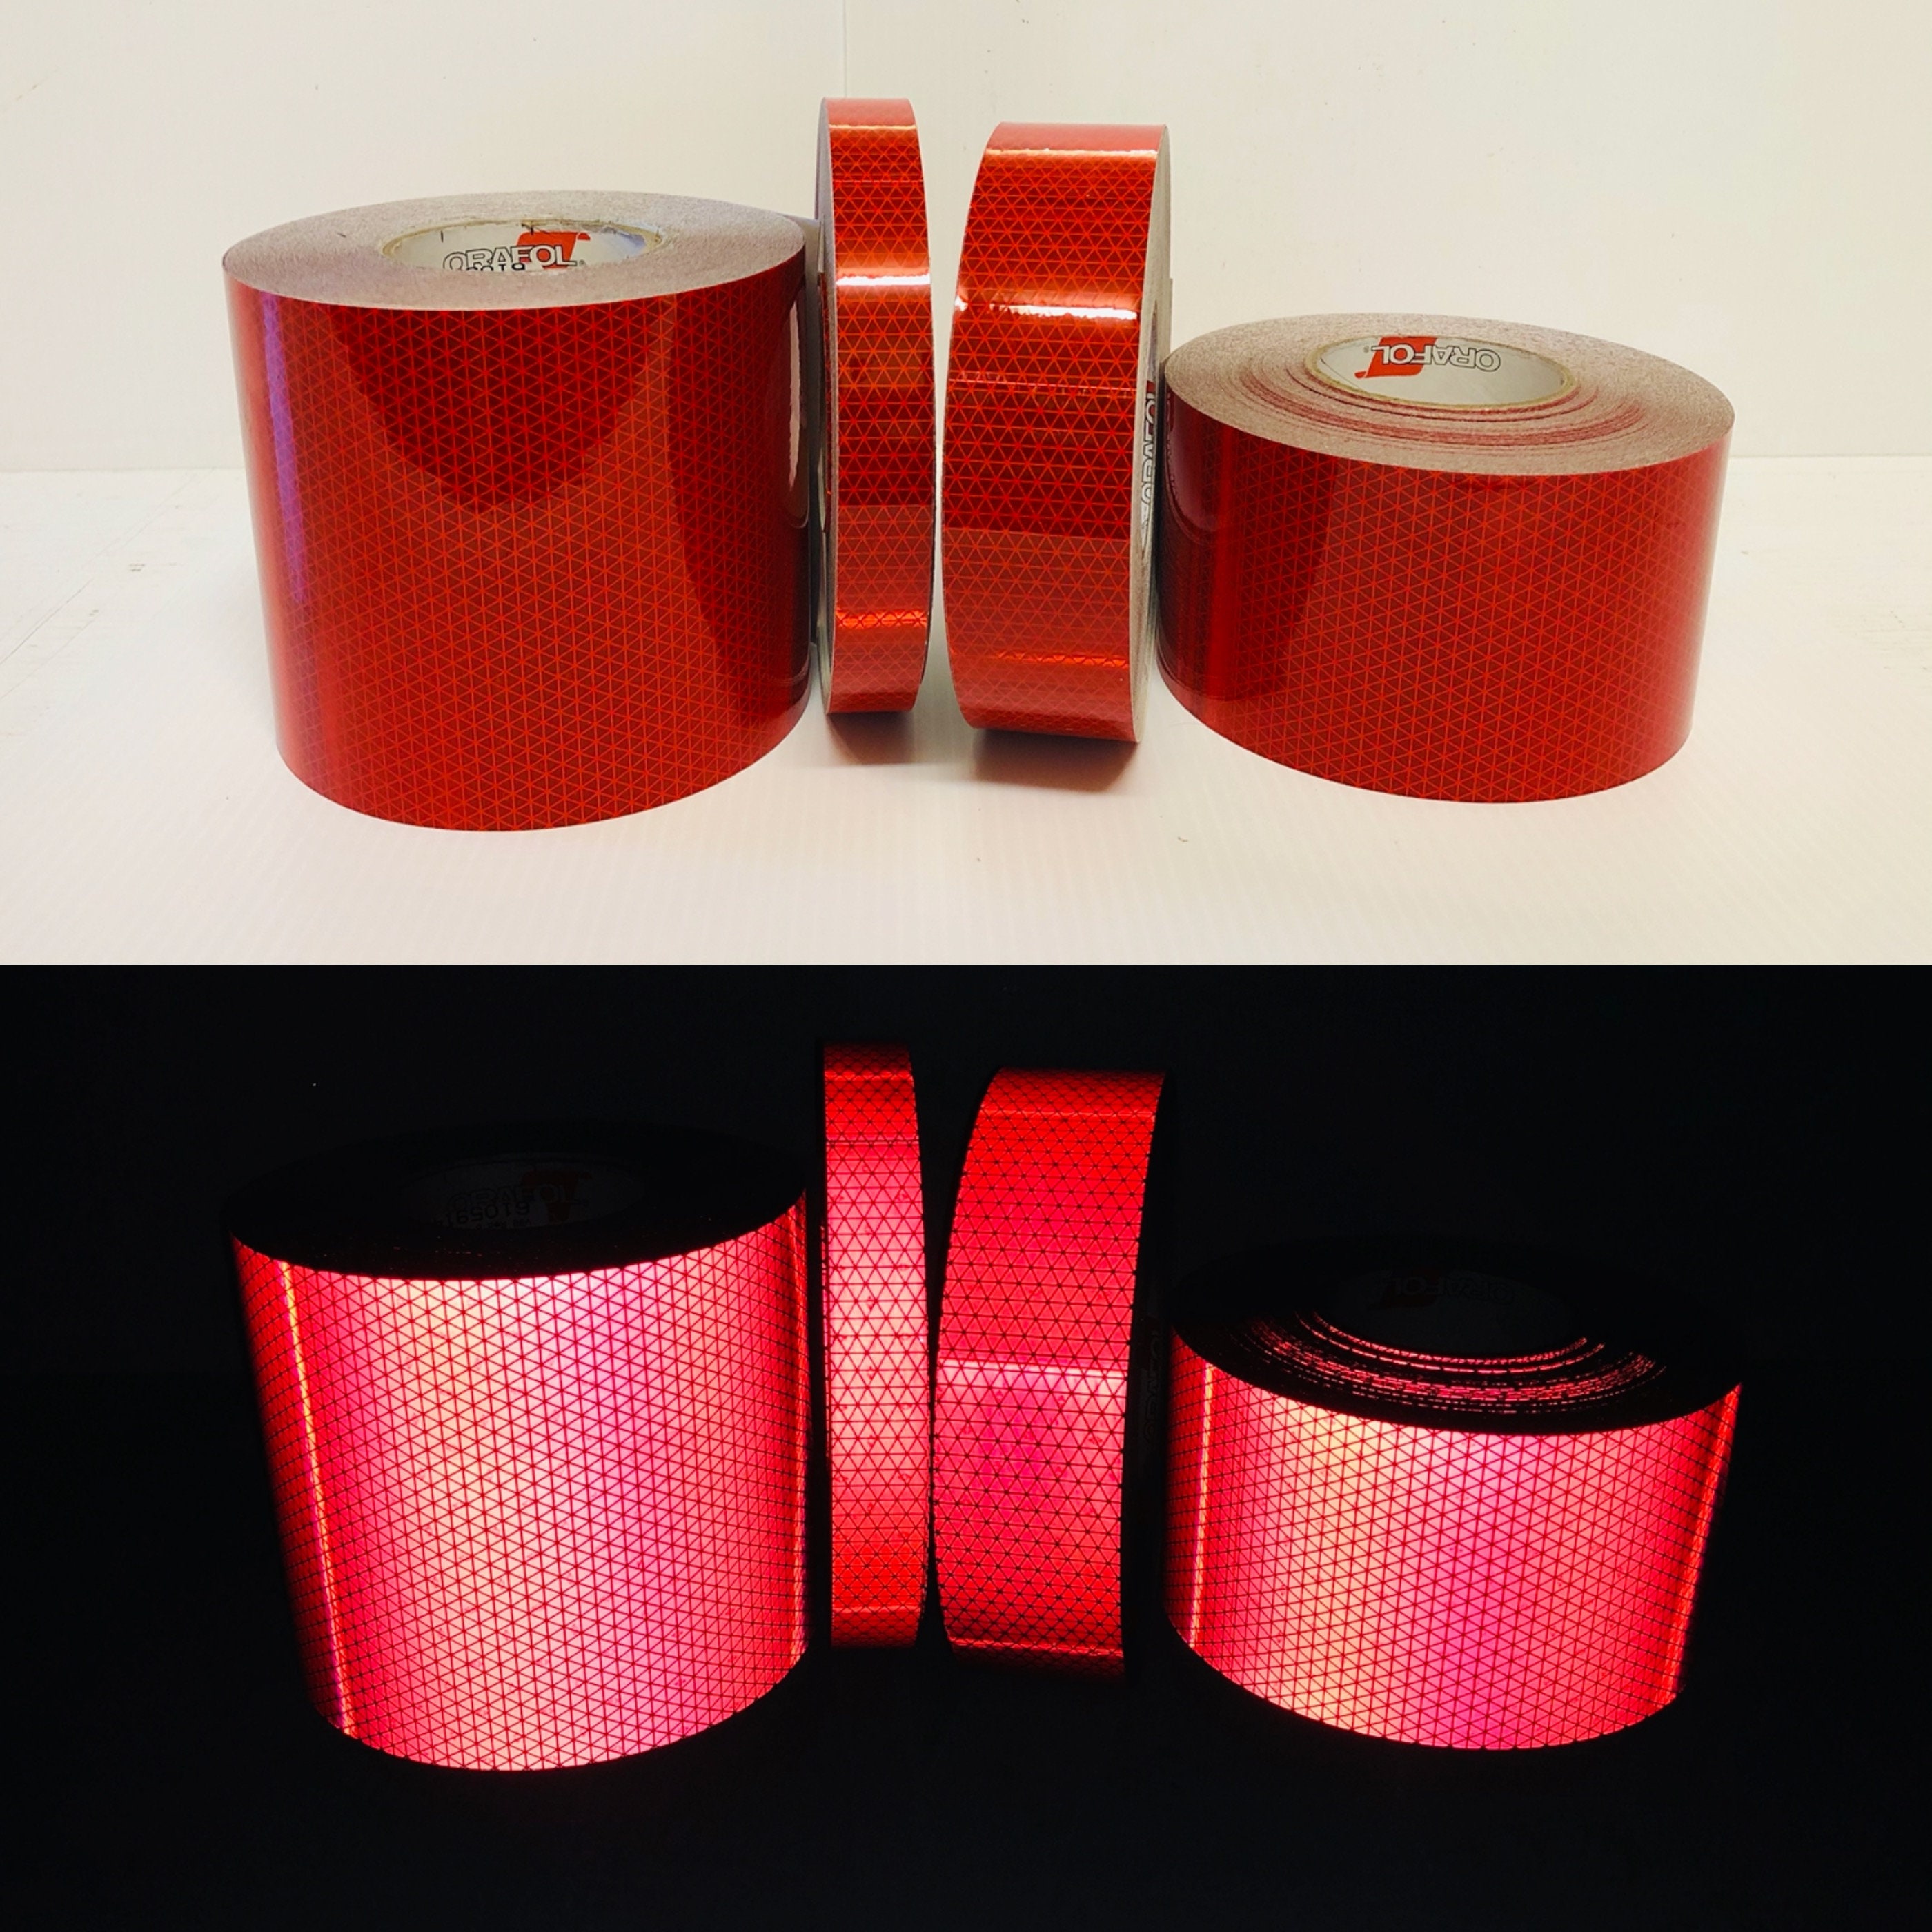 2 Red/White DOT Tape (Cases of 10 Rolls) Wholesale - ORALITE